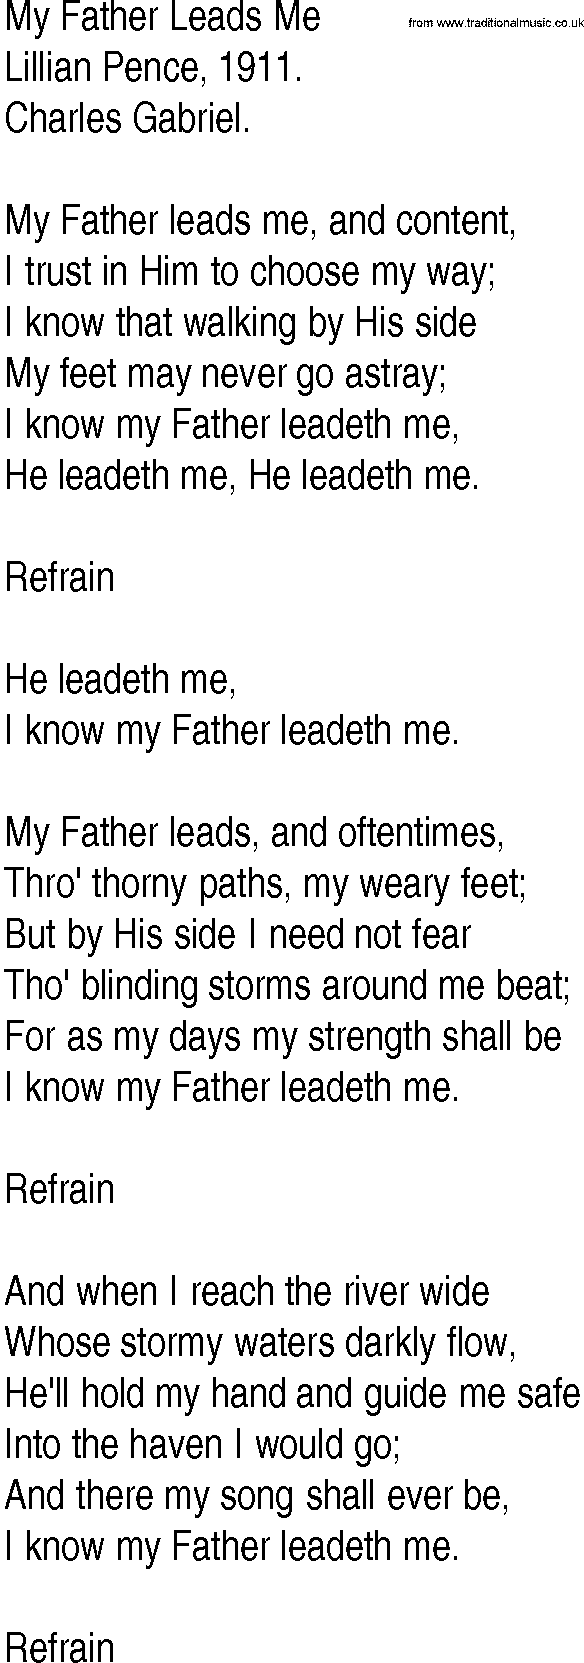 Hymn and Gospel Song: My Father Leads Me by Lillian Pence lyrics